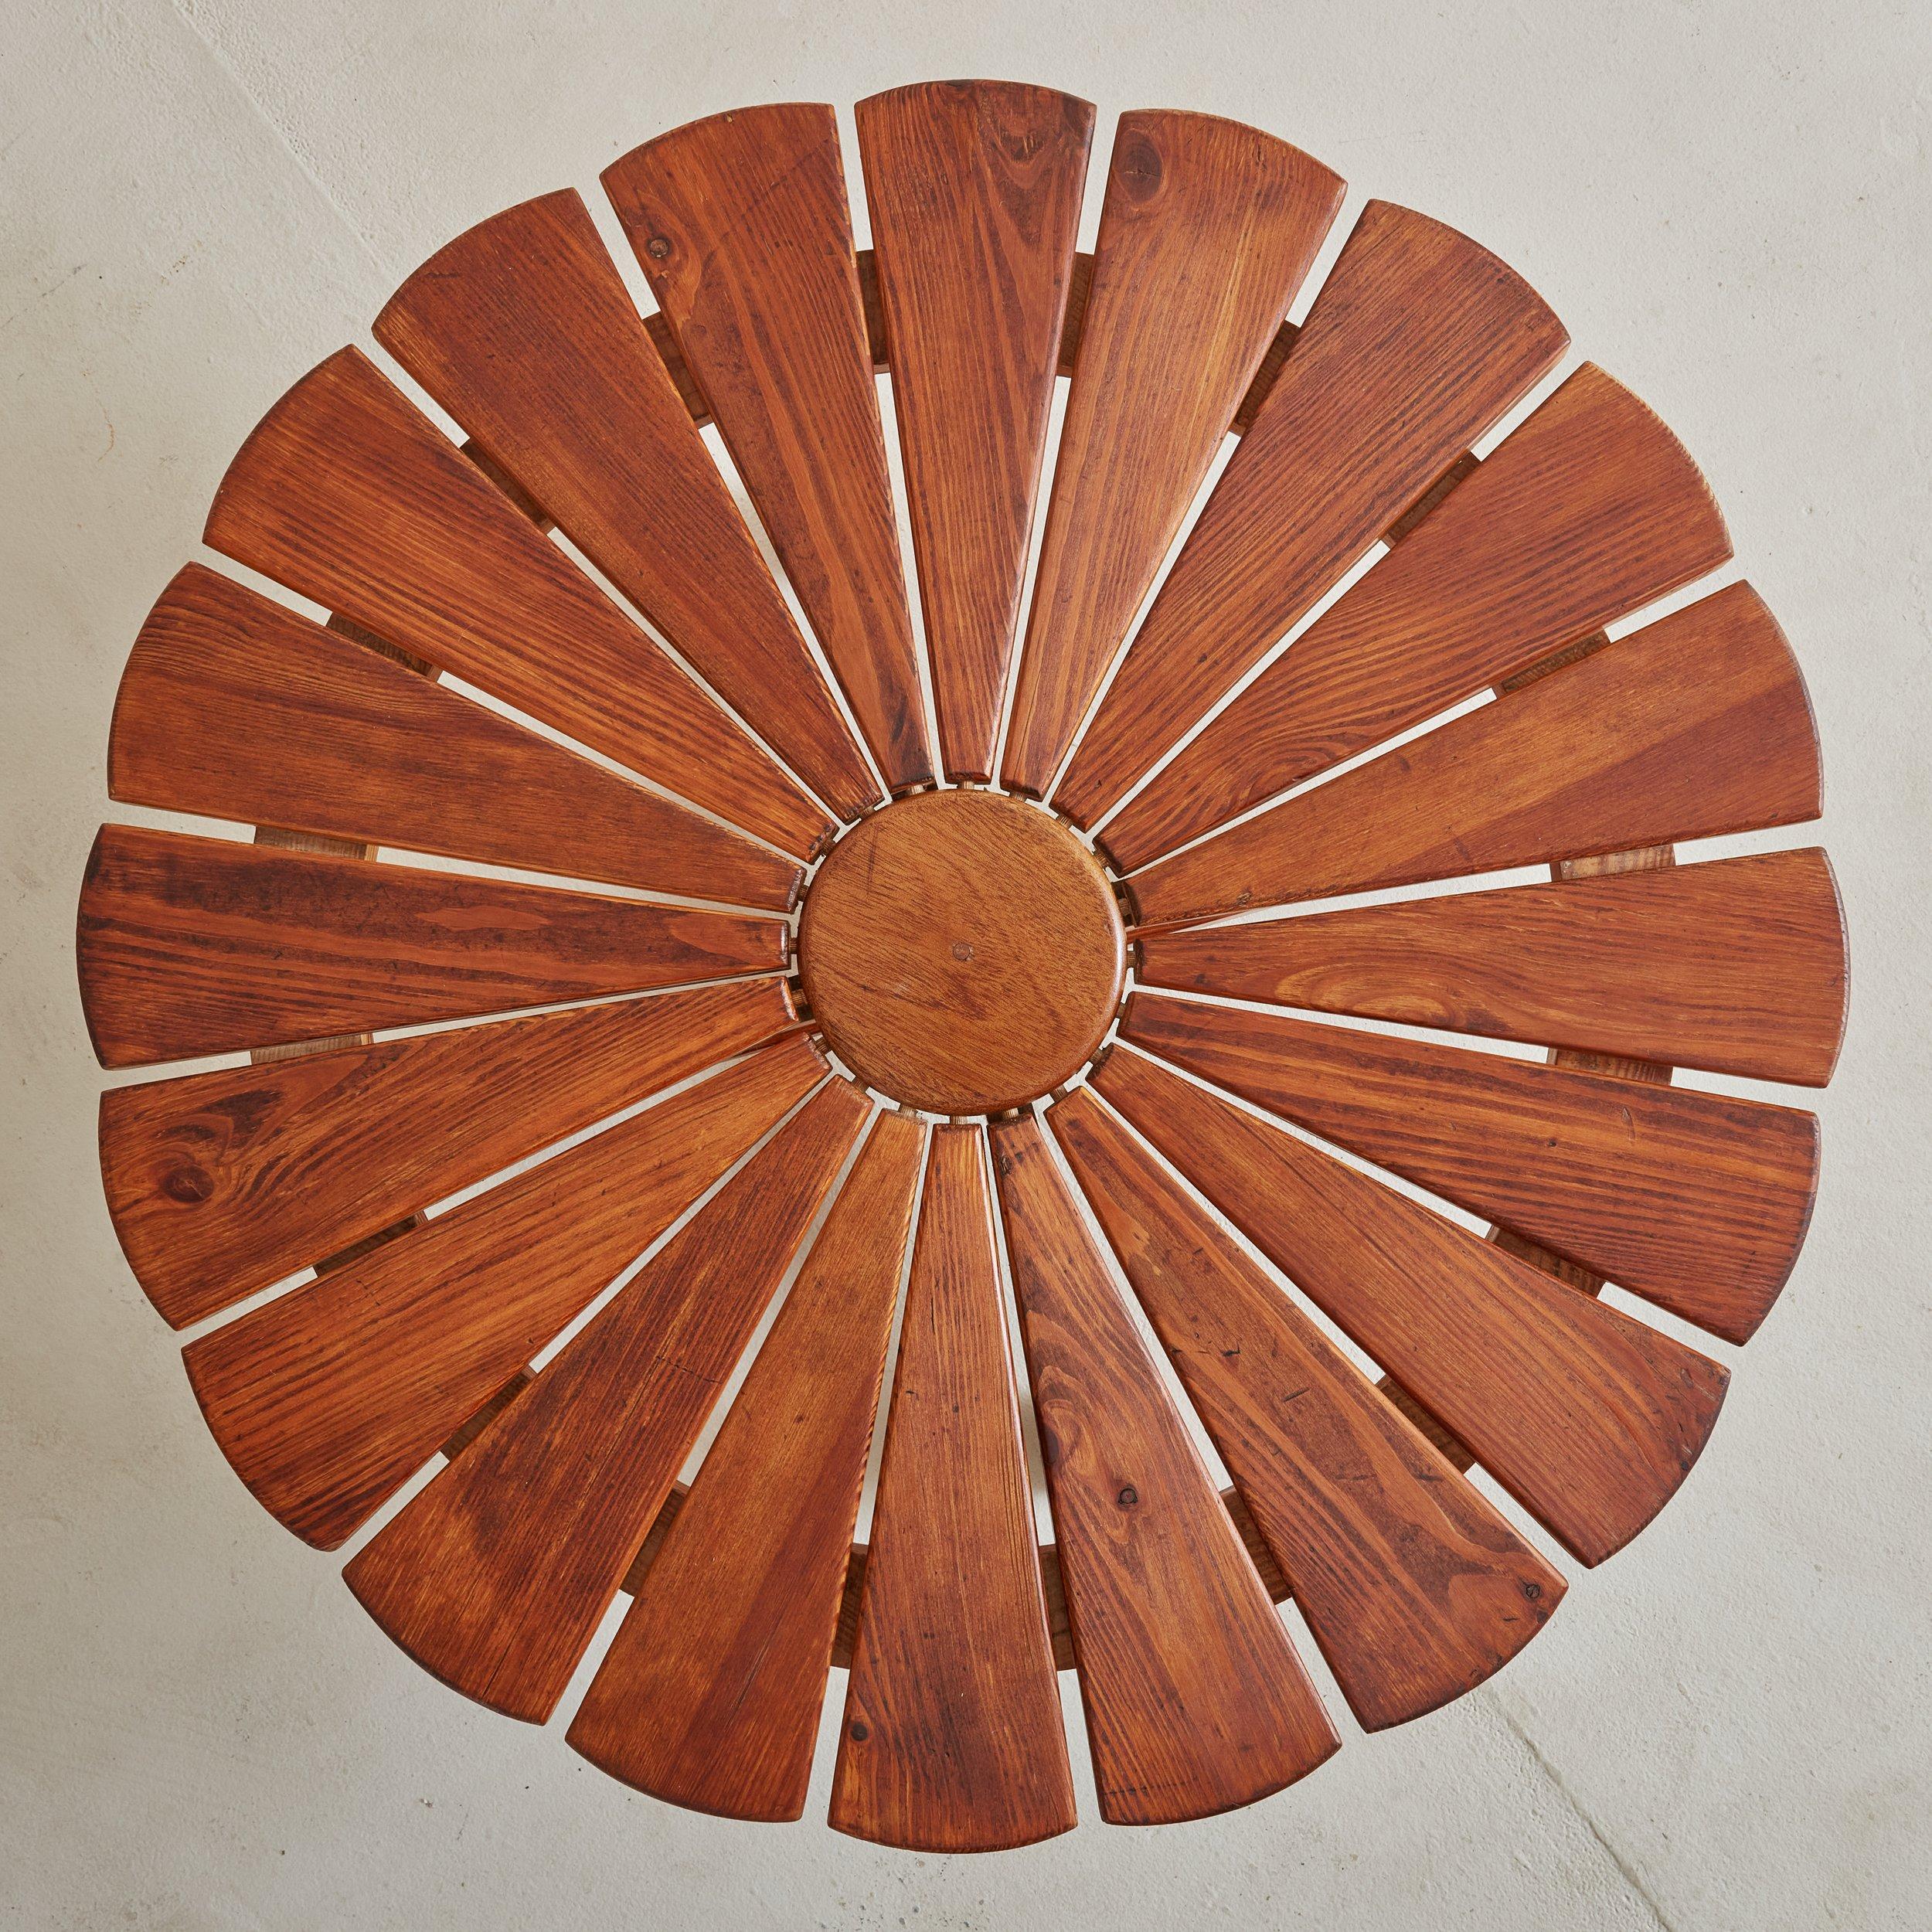 A Mid-Century Modern pine wood flower coffee table from the 1950s. This charming coffee table features a flower top composed of a round center surrounded by symmetric triangular shaped planks. Four tapered angular legs extend from the top and are